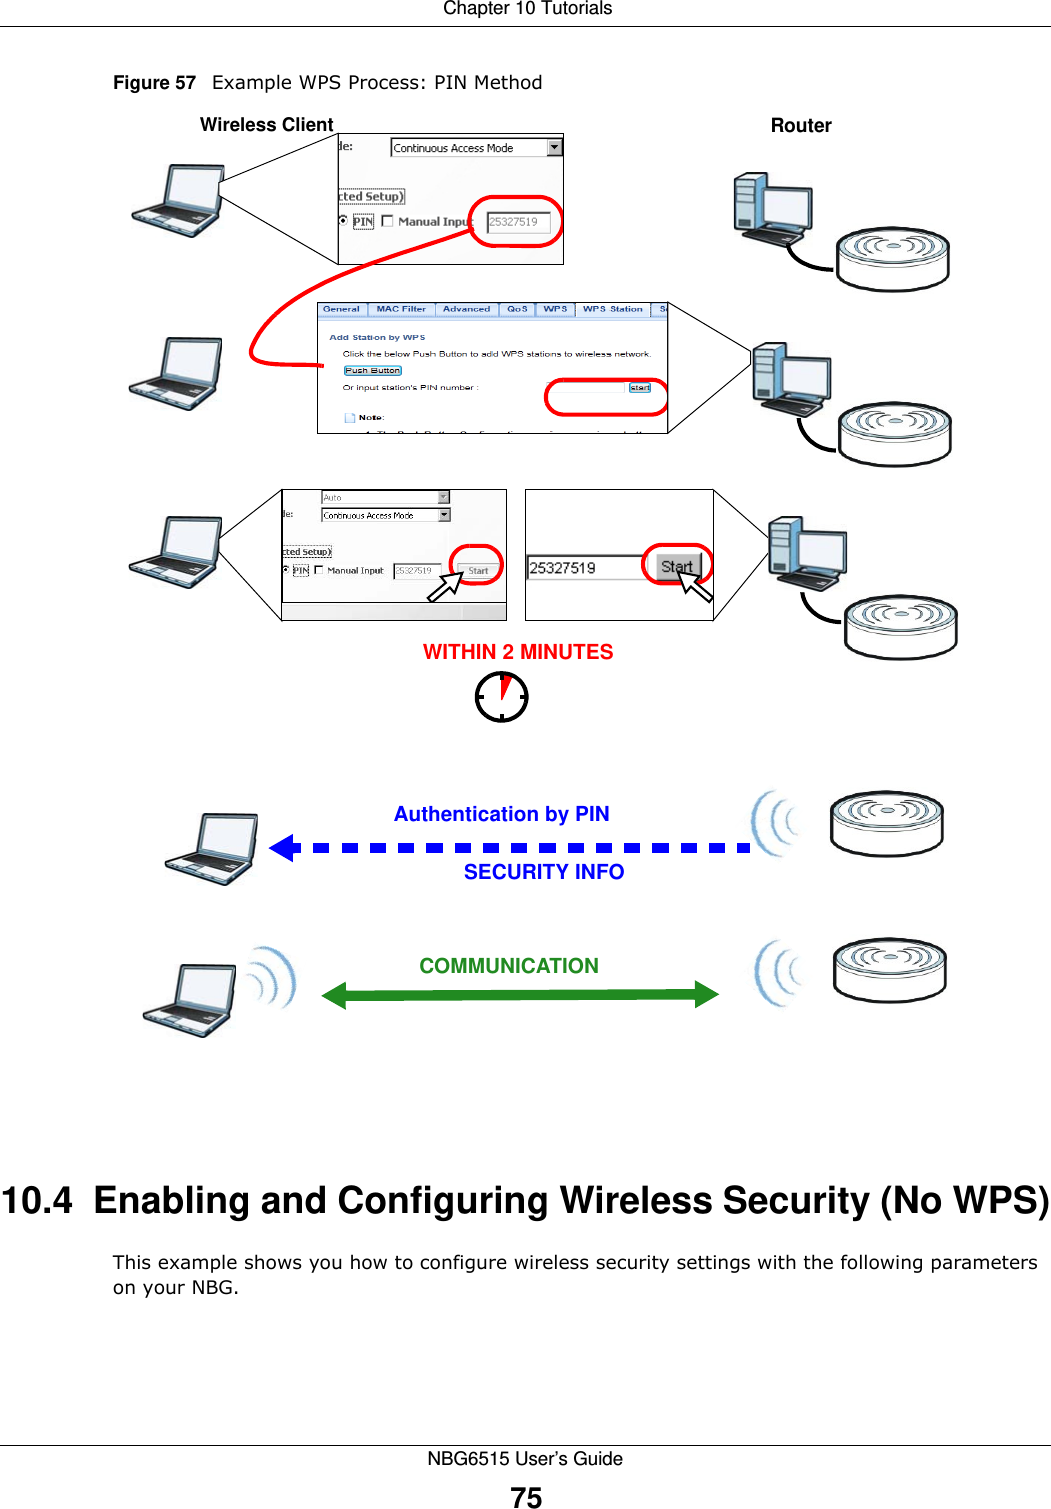  Chapter 10 TutorialsNBG6515 User’s Guide75Figure 57   Example WPS Process: PIN Method10.4  Enabling and Configuring Wireless Security (No WPS)This example shows you how to configure wireless security settings with the following parameters on your NBG.Authentication by PINSECURITY INFOWITHIN 2 MINUTESWireless ClientRouterCOMMUNICATION